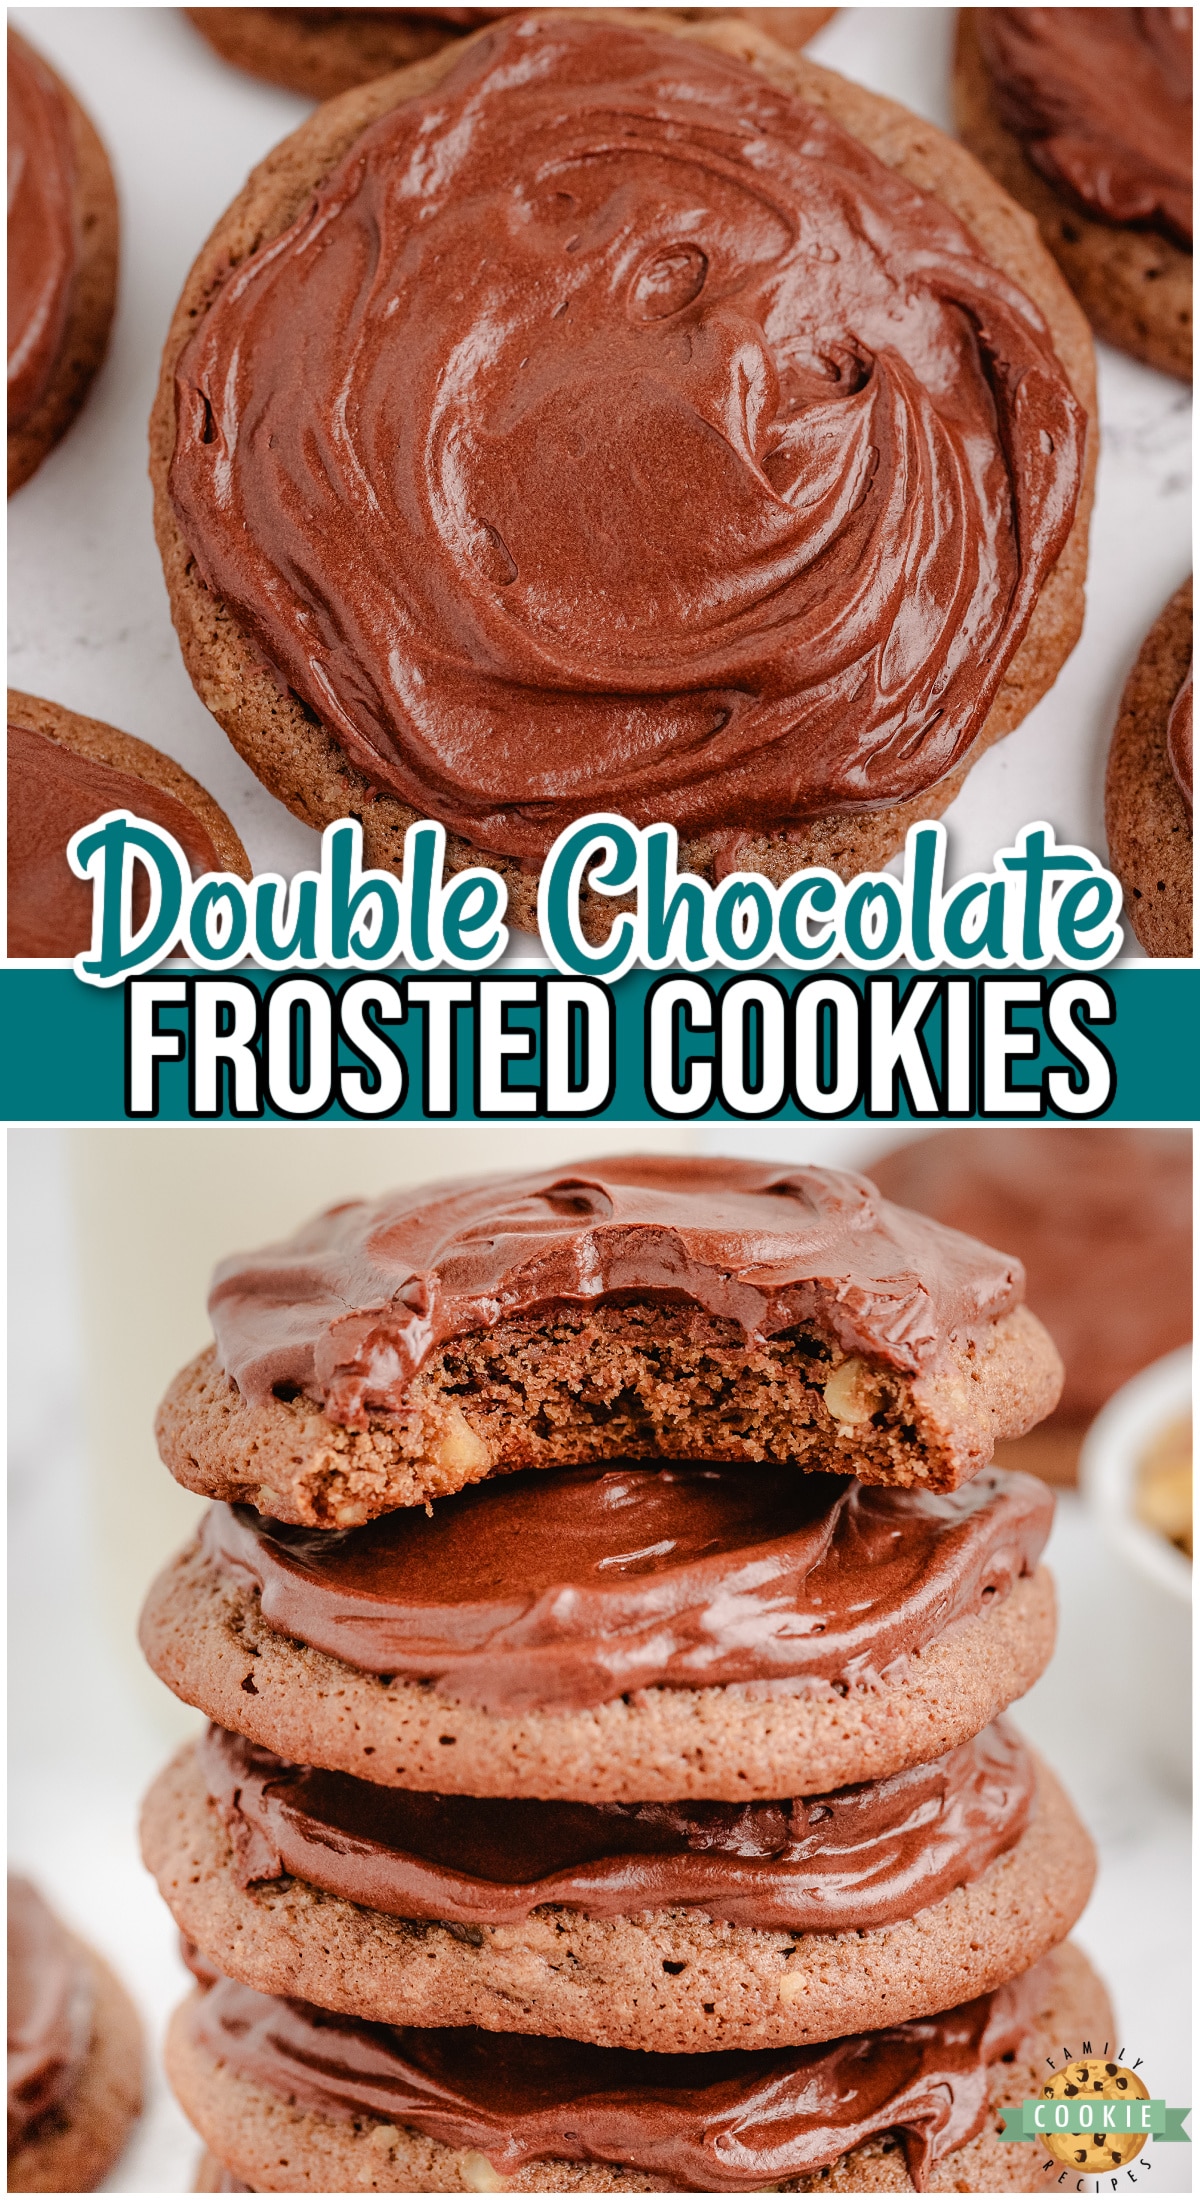 Frosted Double Chocolate Cookies are decadent cookies perfect for any chocolate lover! These chocolate walnut cookies are made with twice the chocolate, giving them a rich flavor that's irresistible!